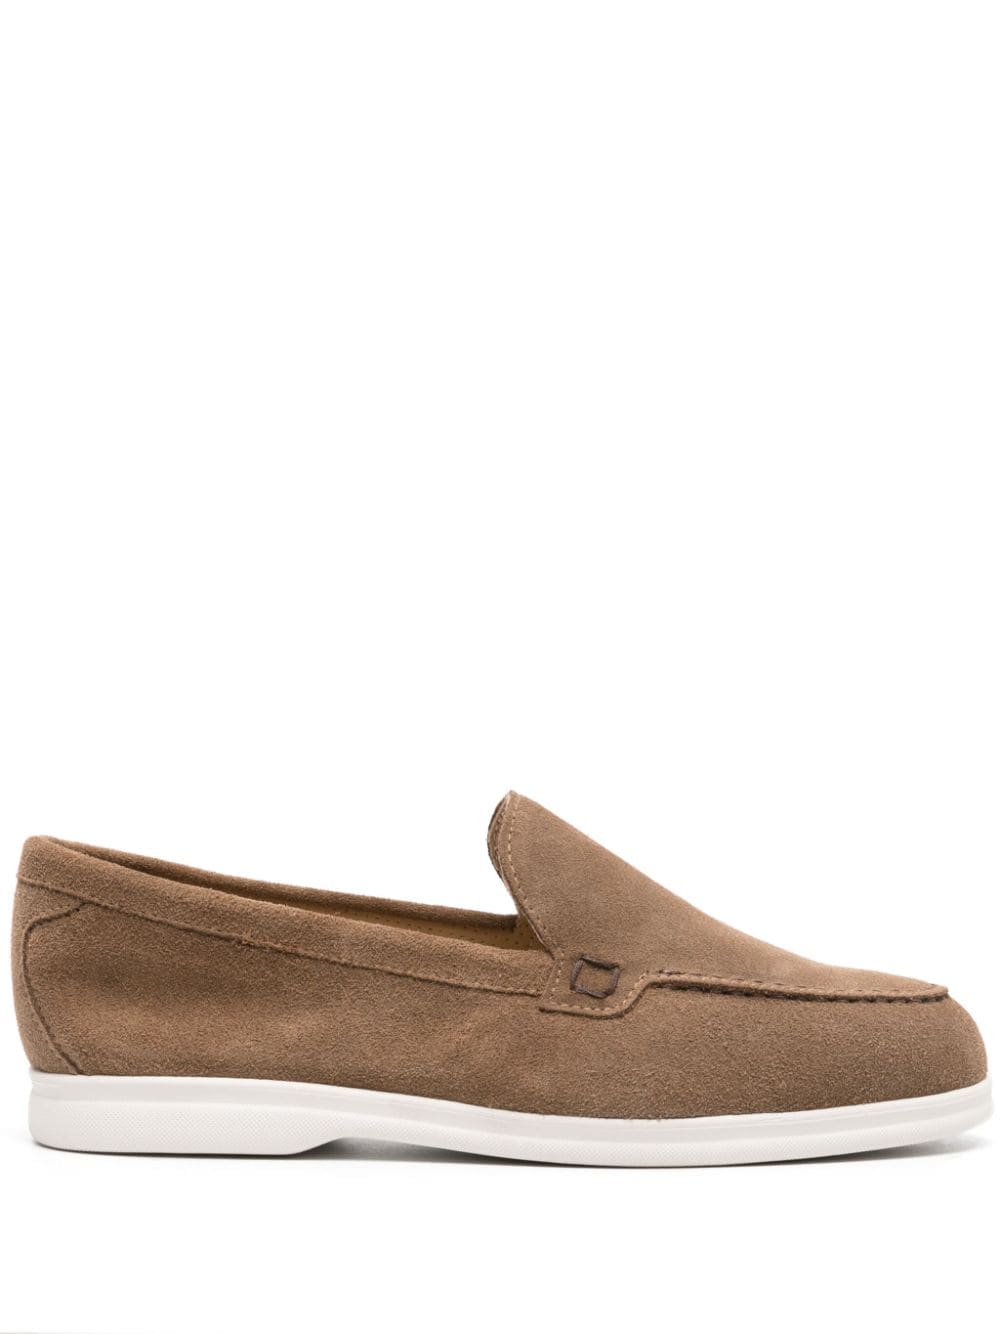 Doucal's almond-toe suede loafers - Brown von Doucal's